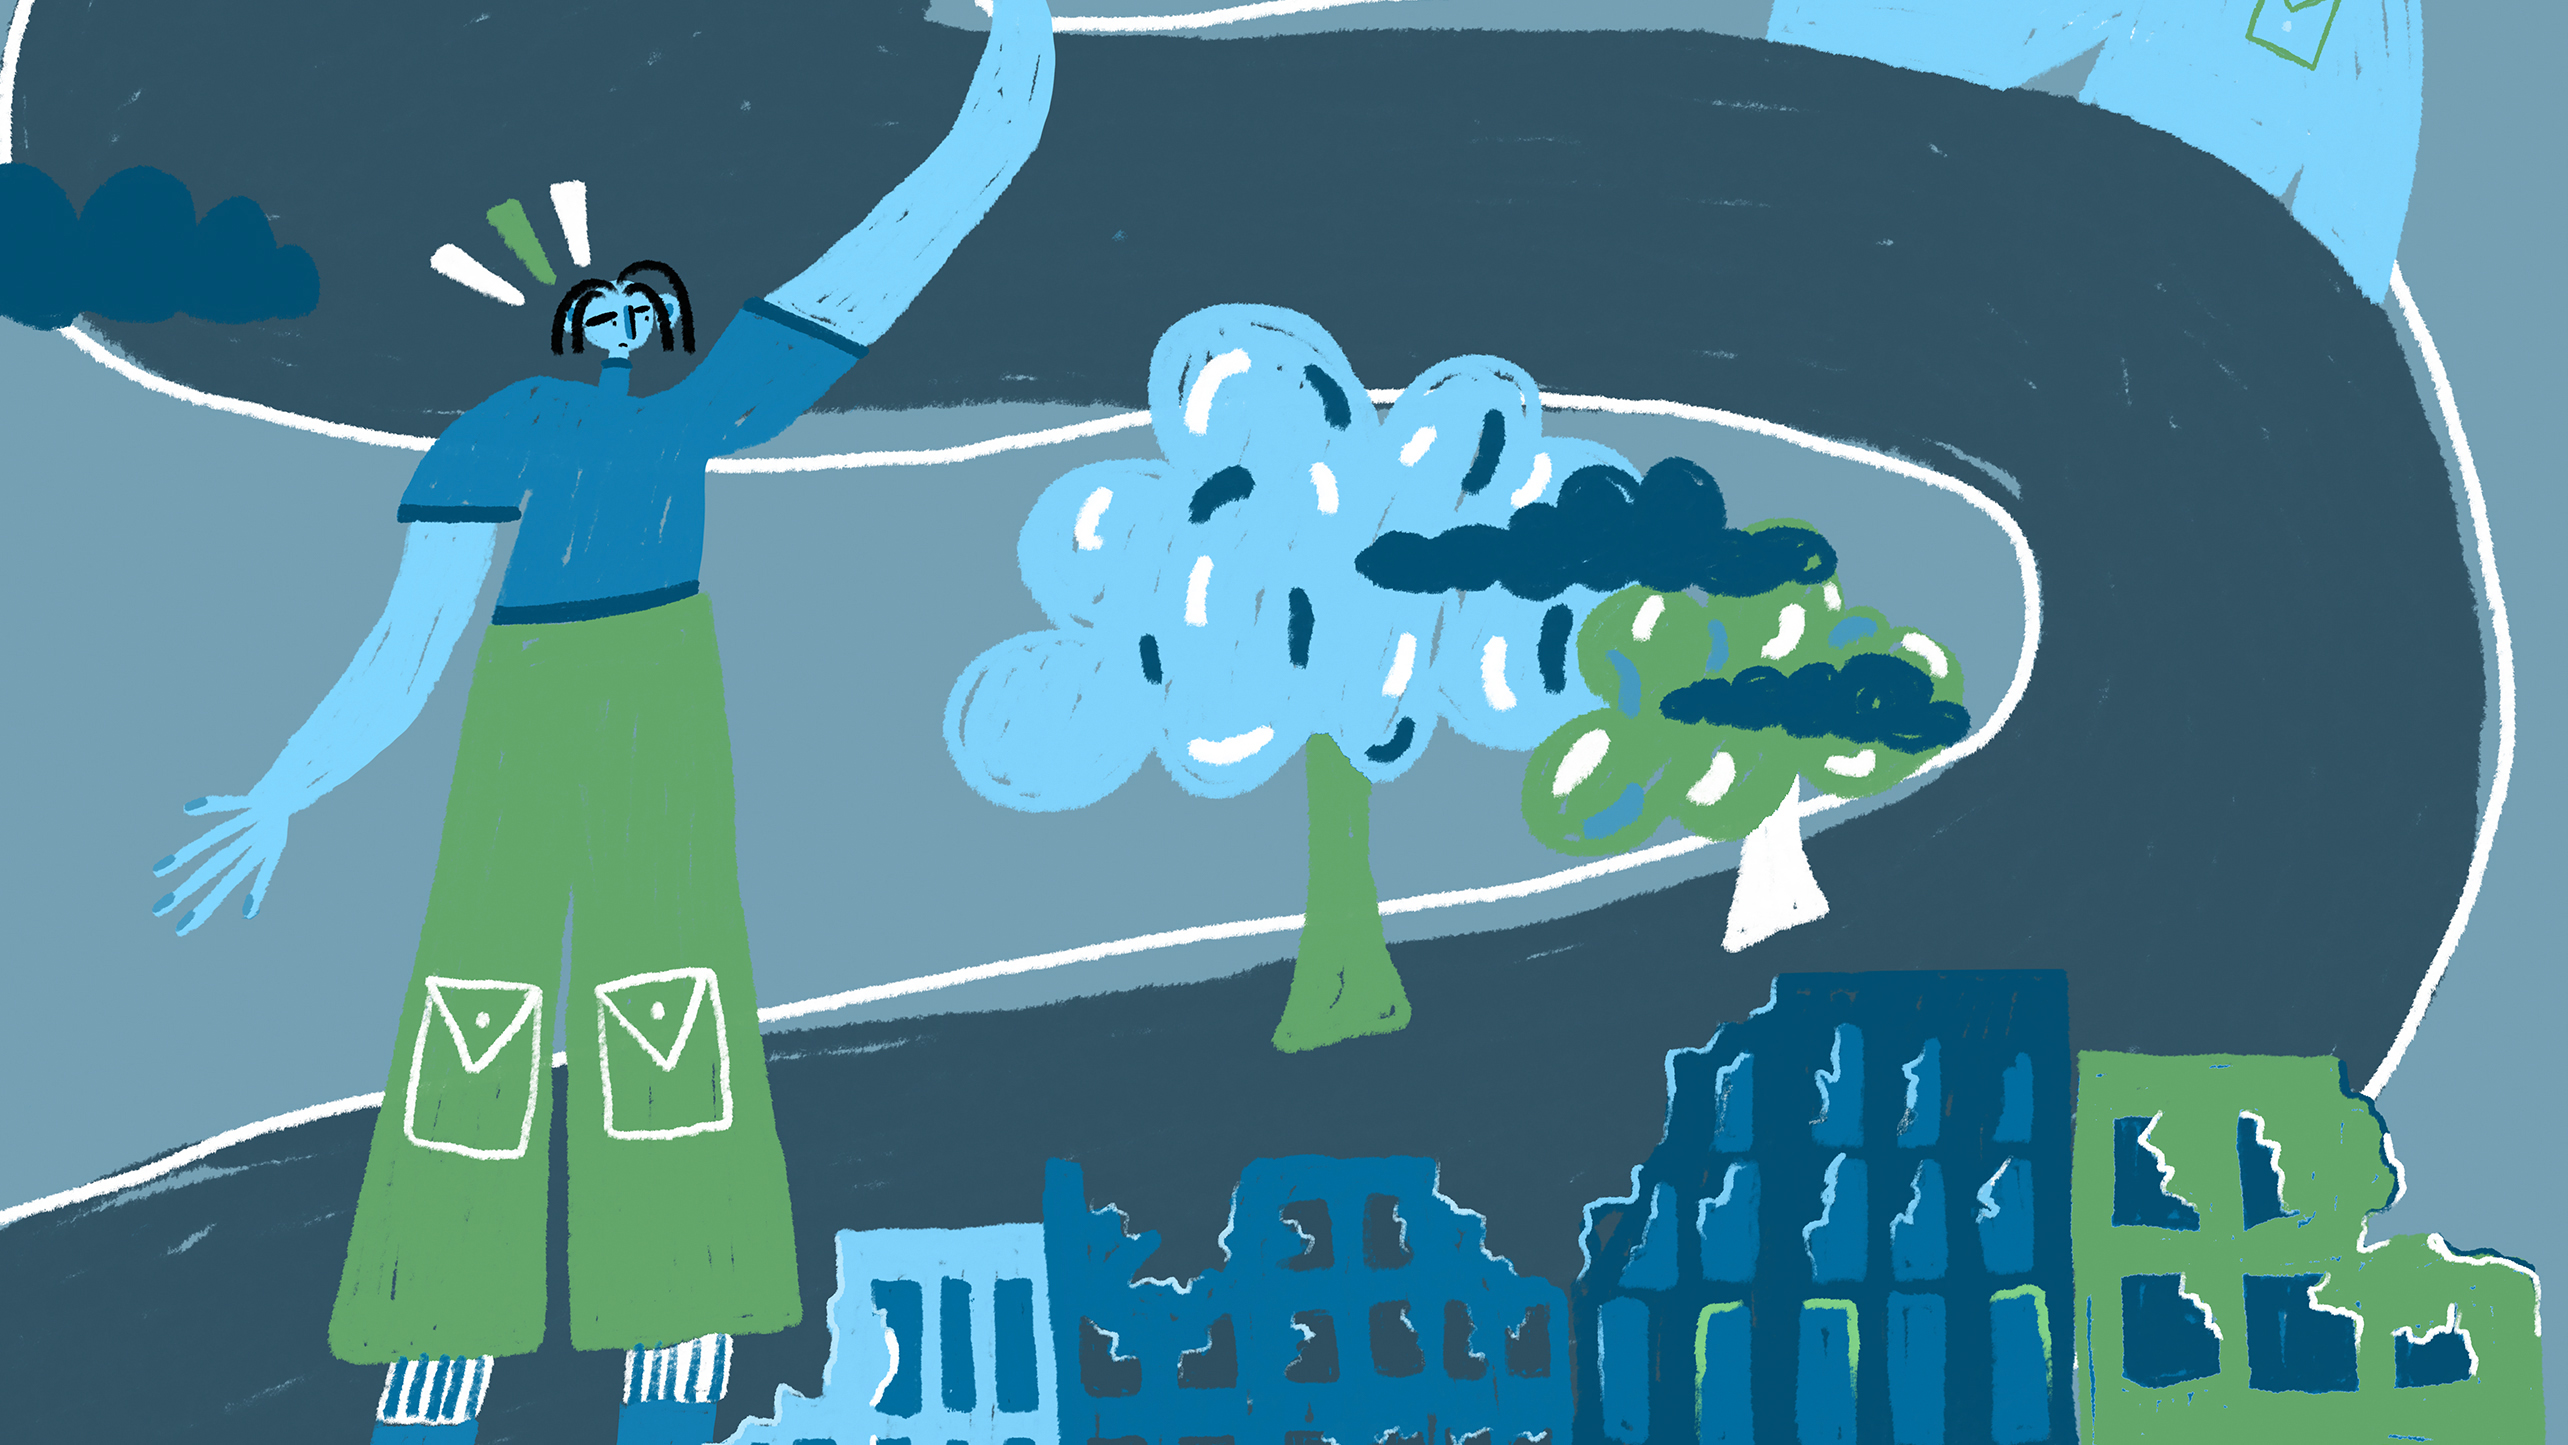 Illustration of person, buildings that have been damaged and trees all in blue, green and grey 